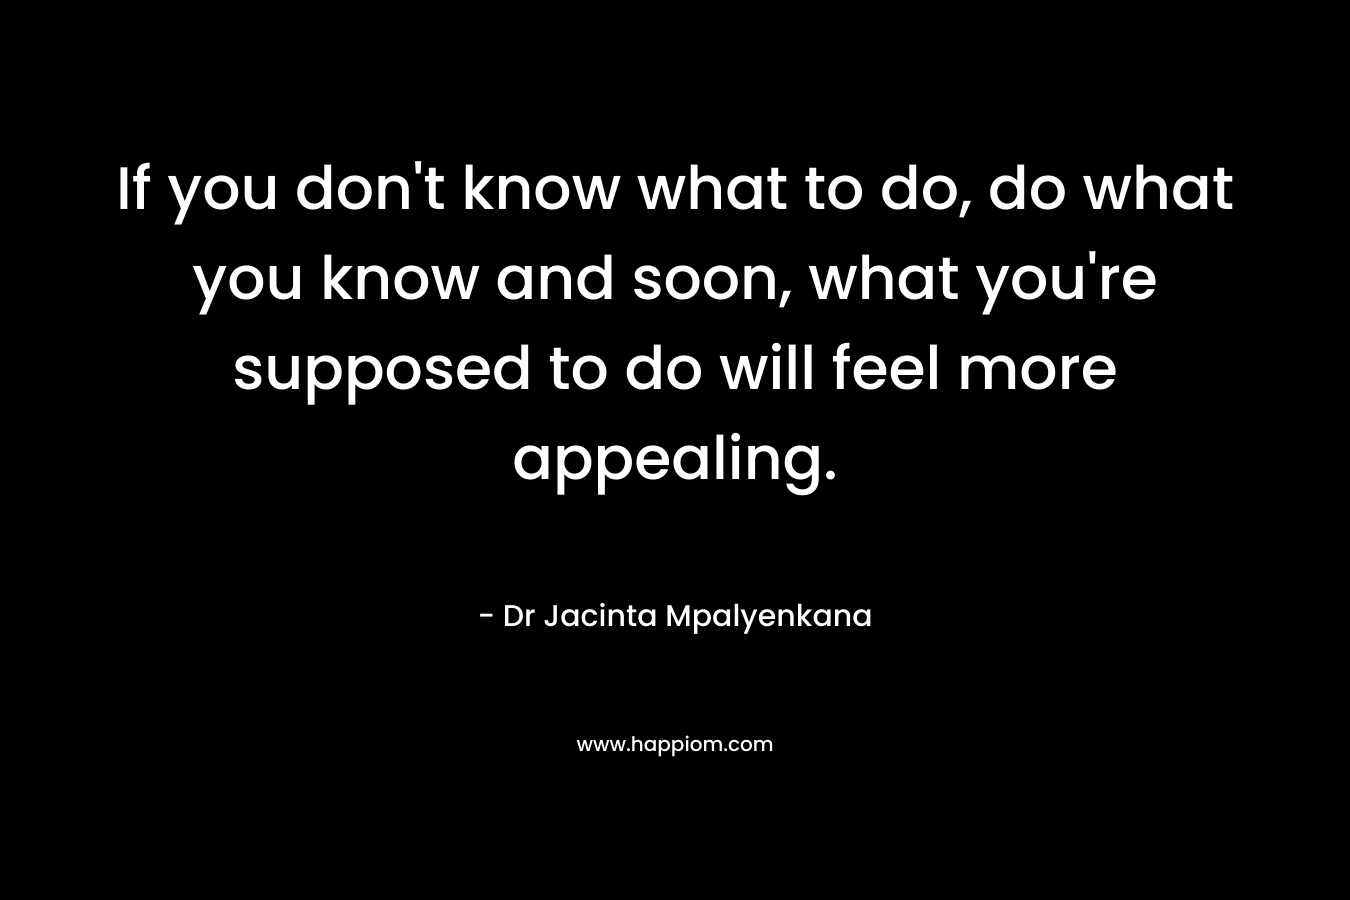 If you don't know what to do, do what you know and soon, what you're supposed to do will feel more appealing.